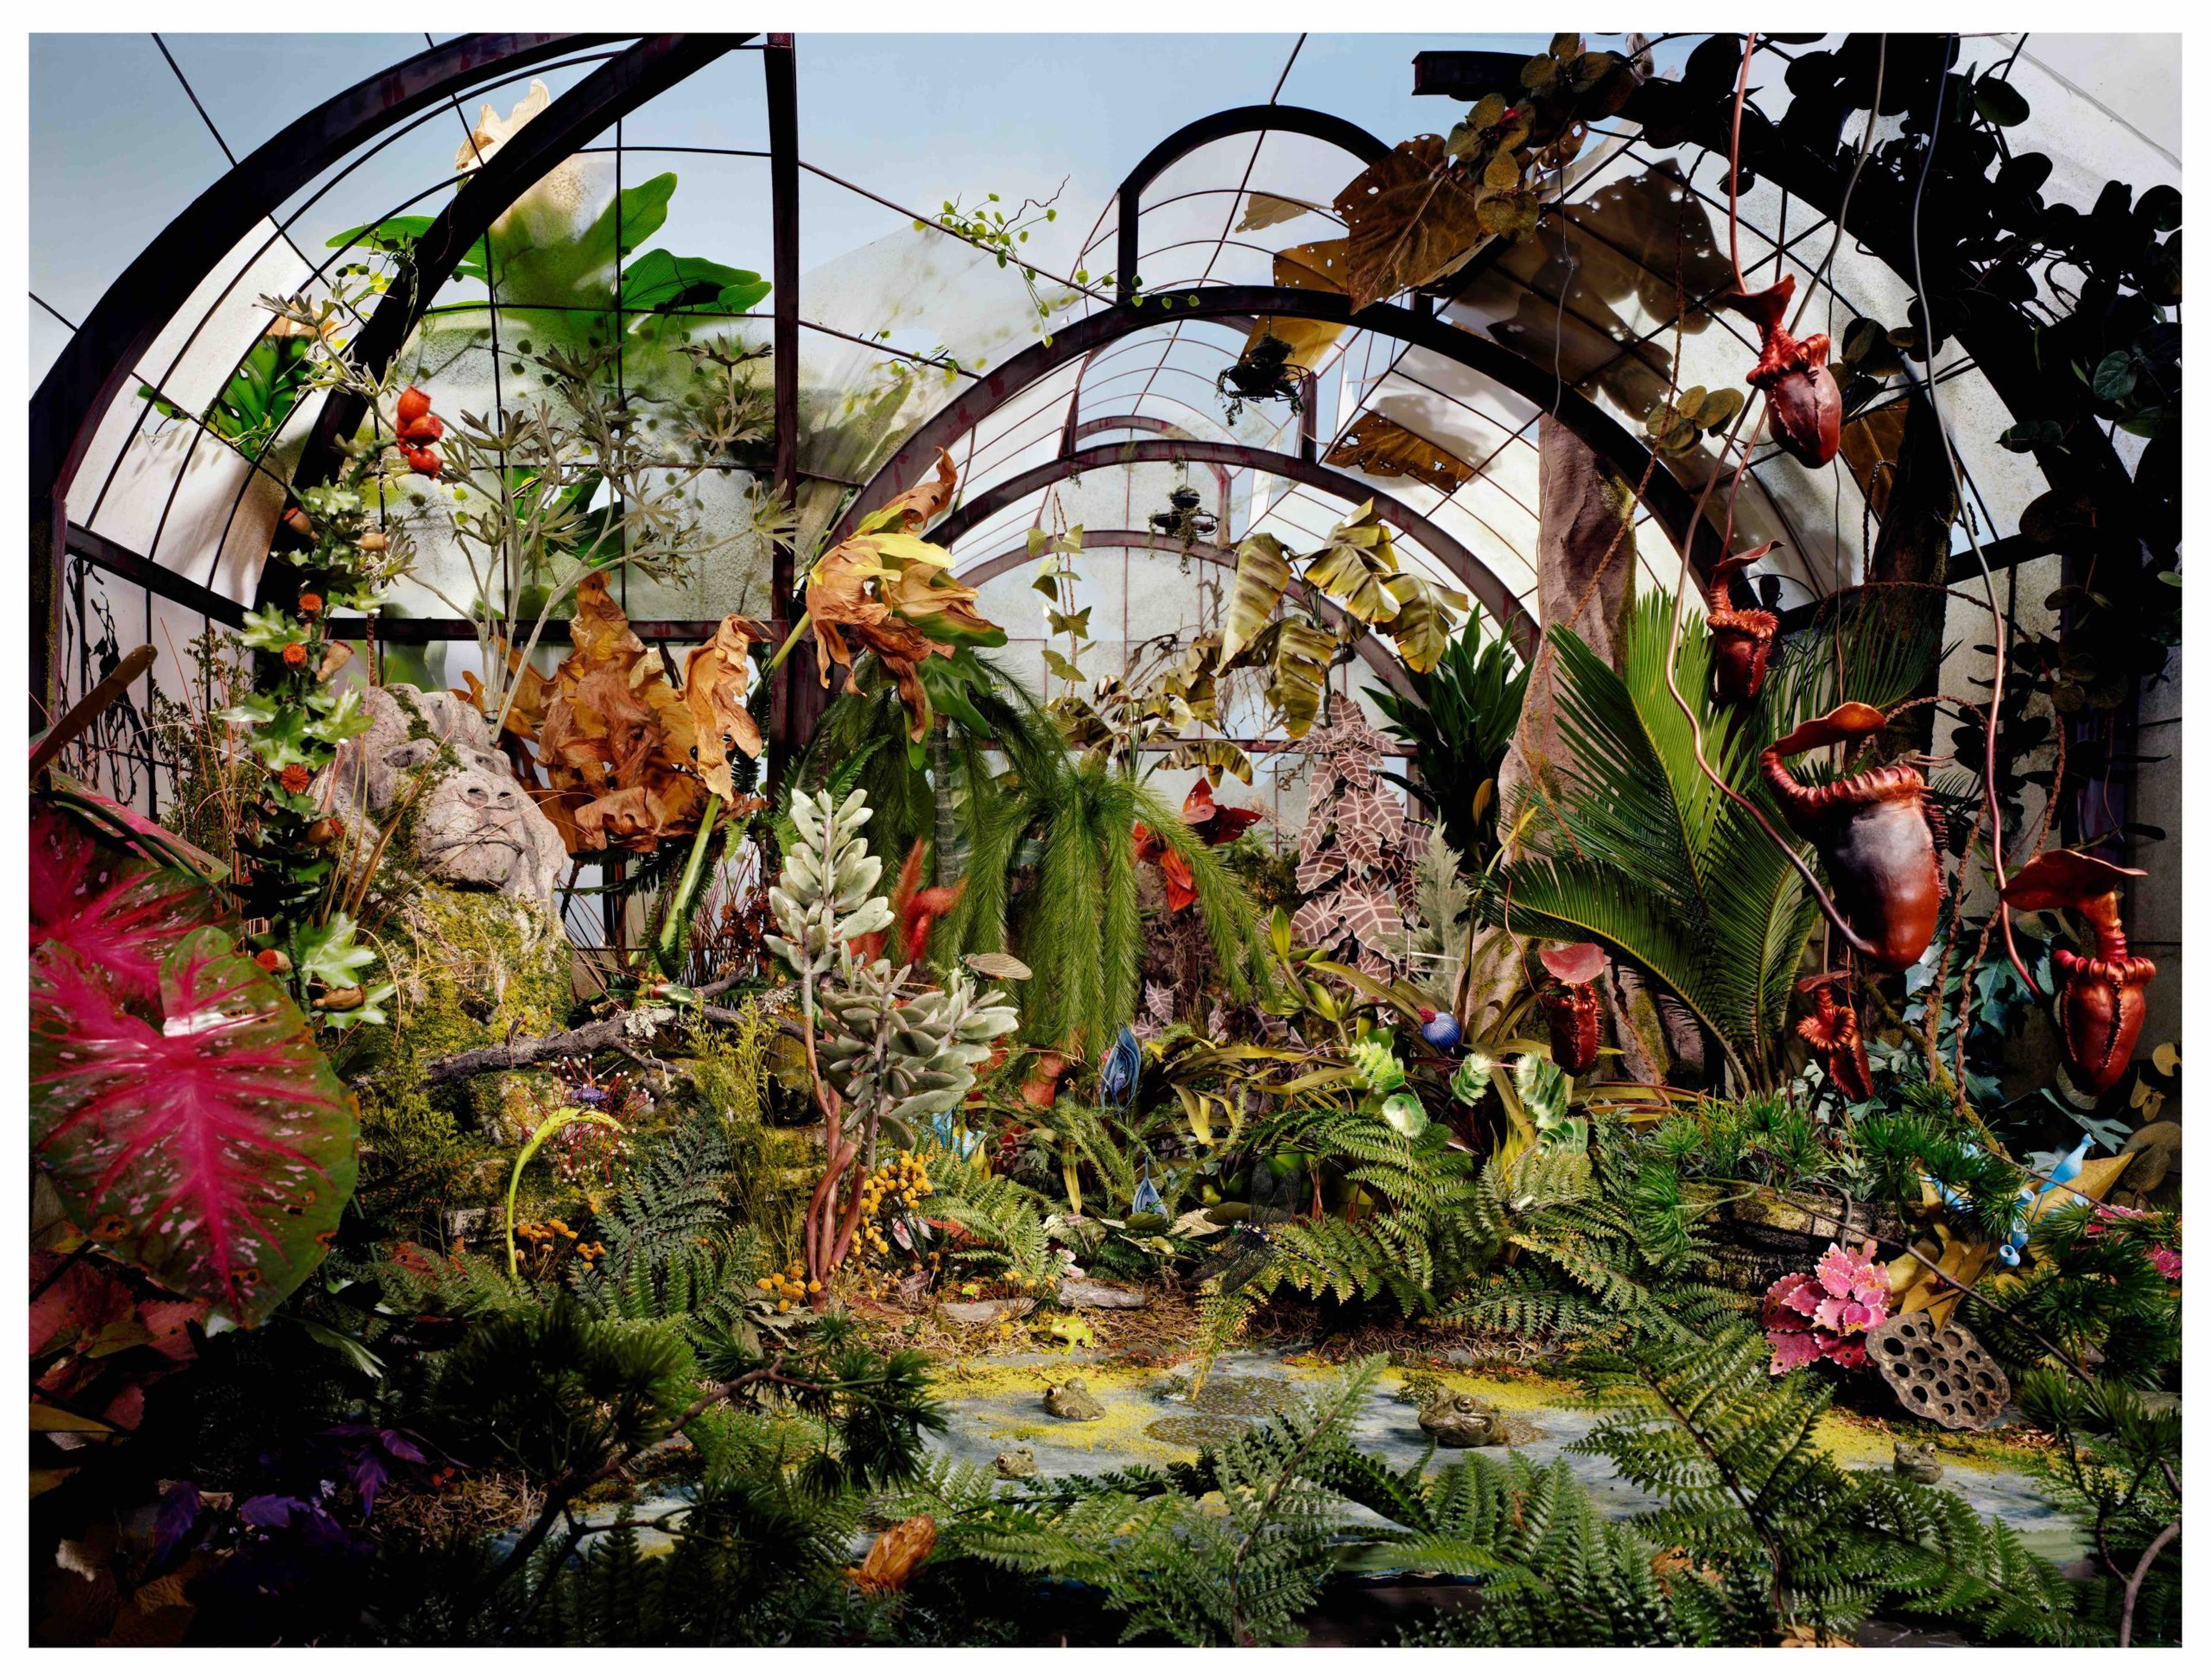 A photographic artwork of a greenhouse overgrown with tropical trees and plants